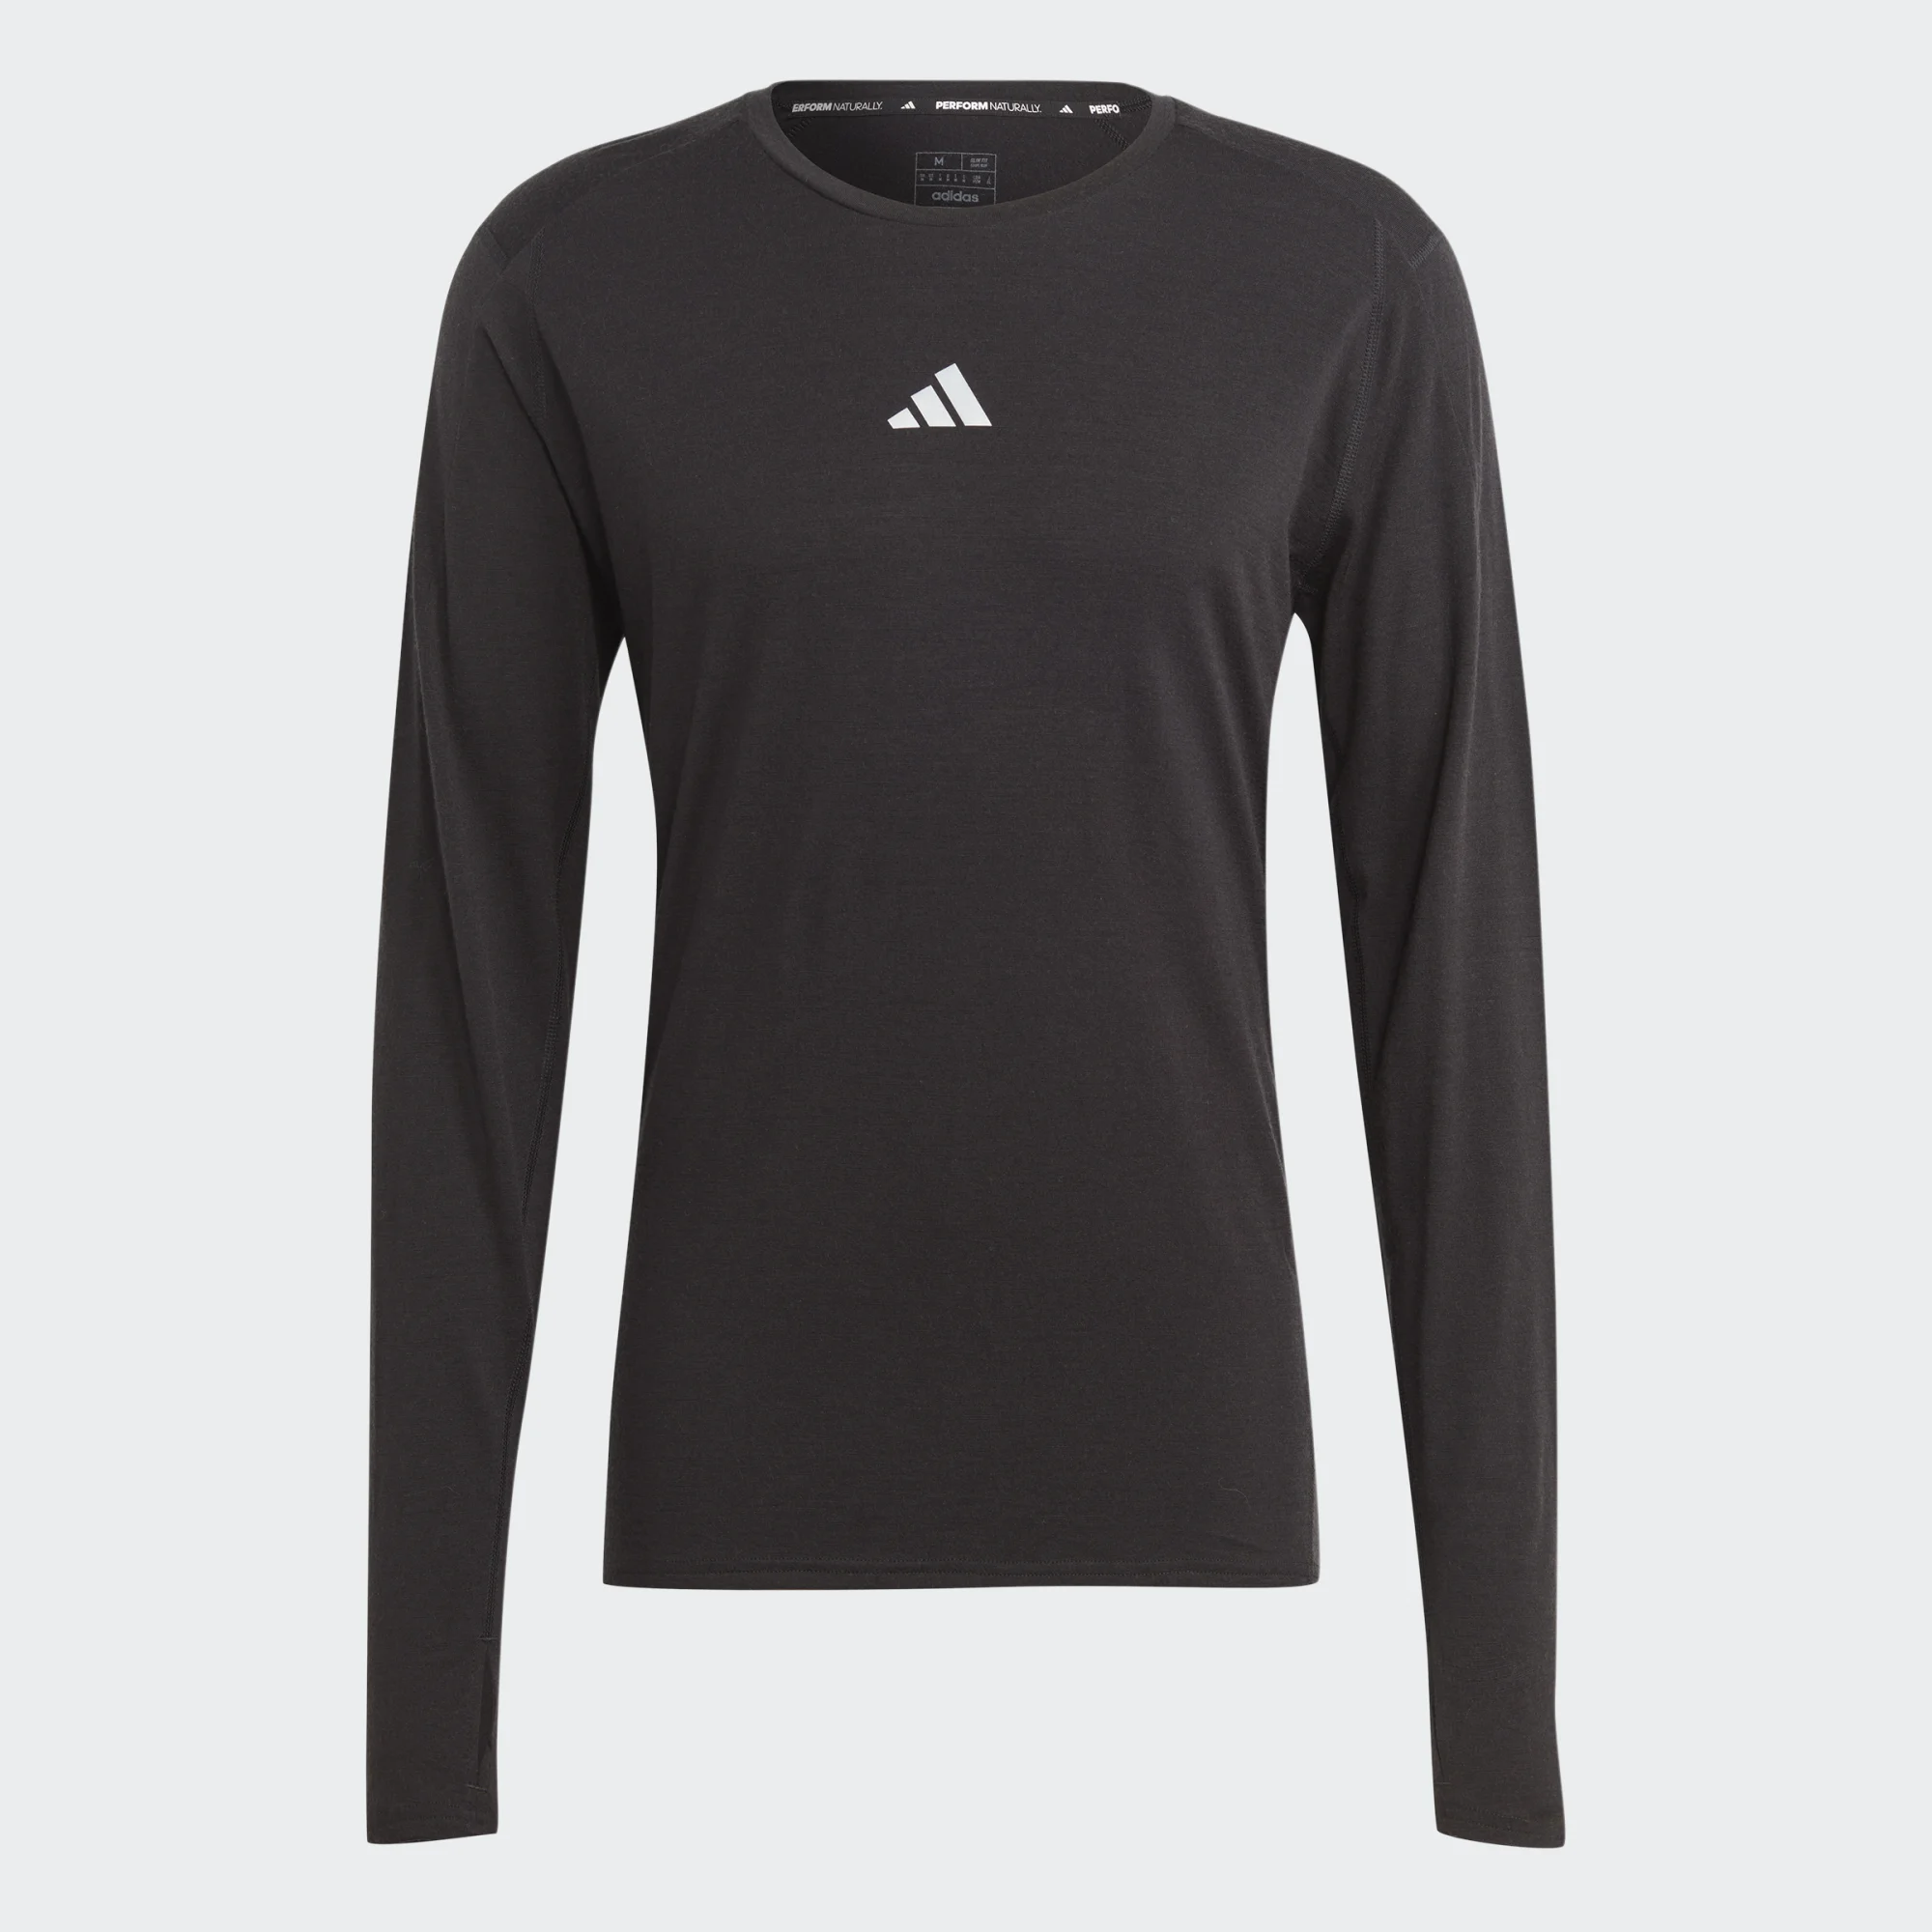 adidas Ultimate Running Conquer the Elements Merino Longsleeve